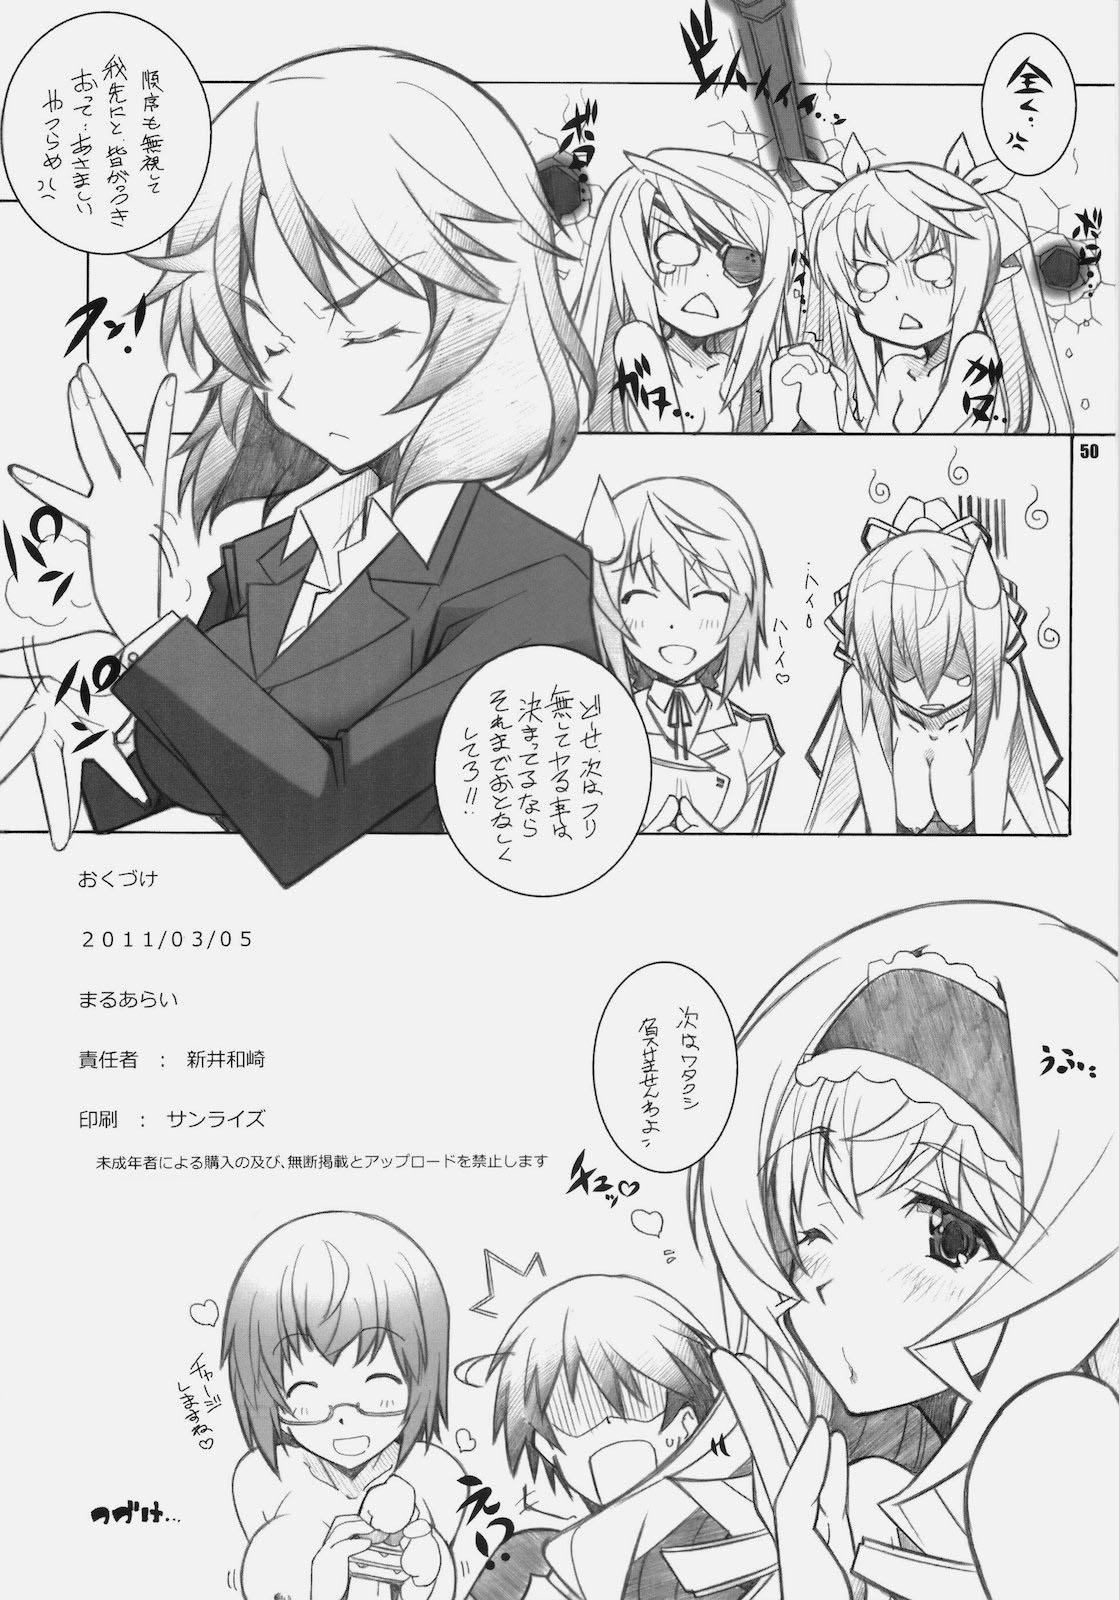 Bald Pussy SEA IS - Infinite stratos Hardcorend - Page 49